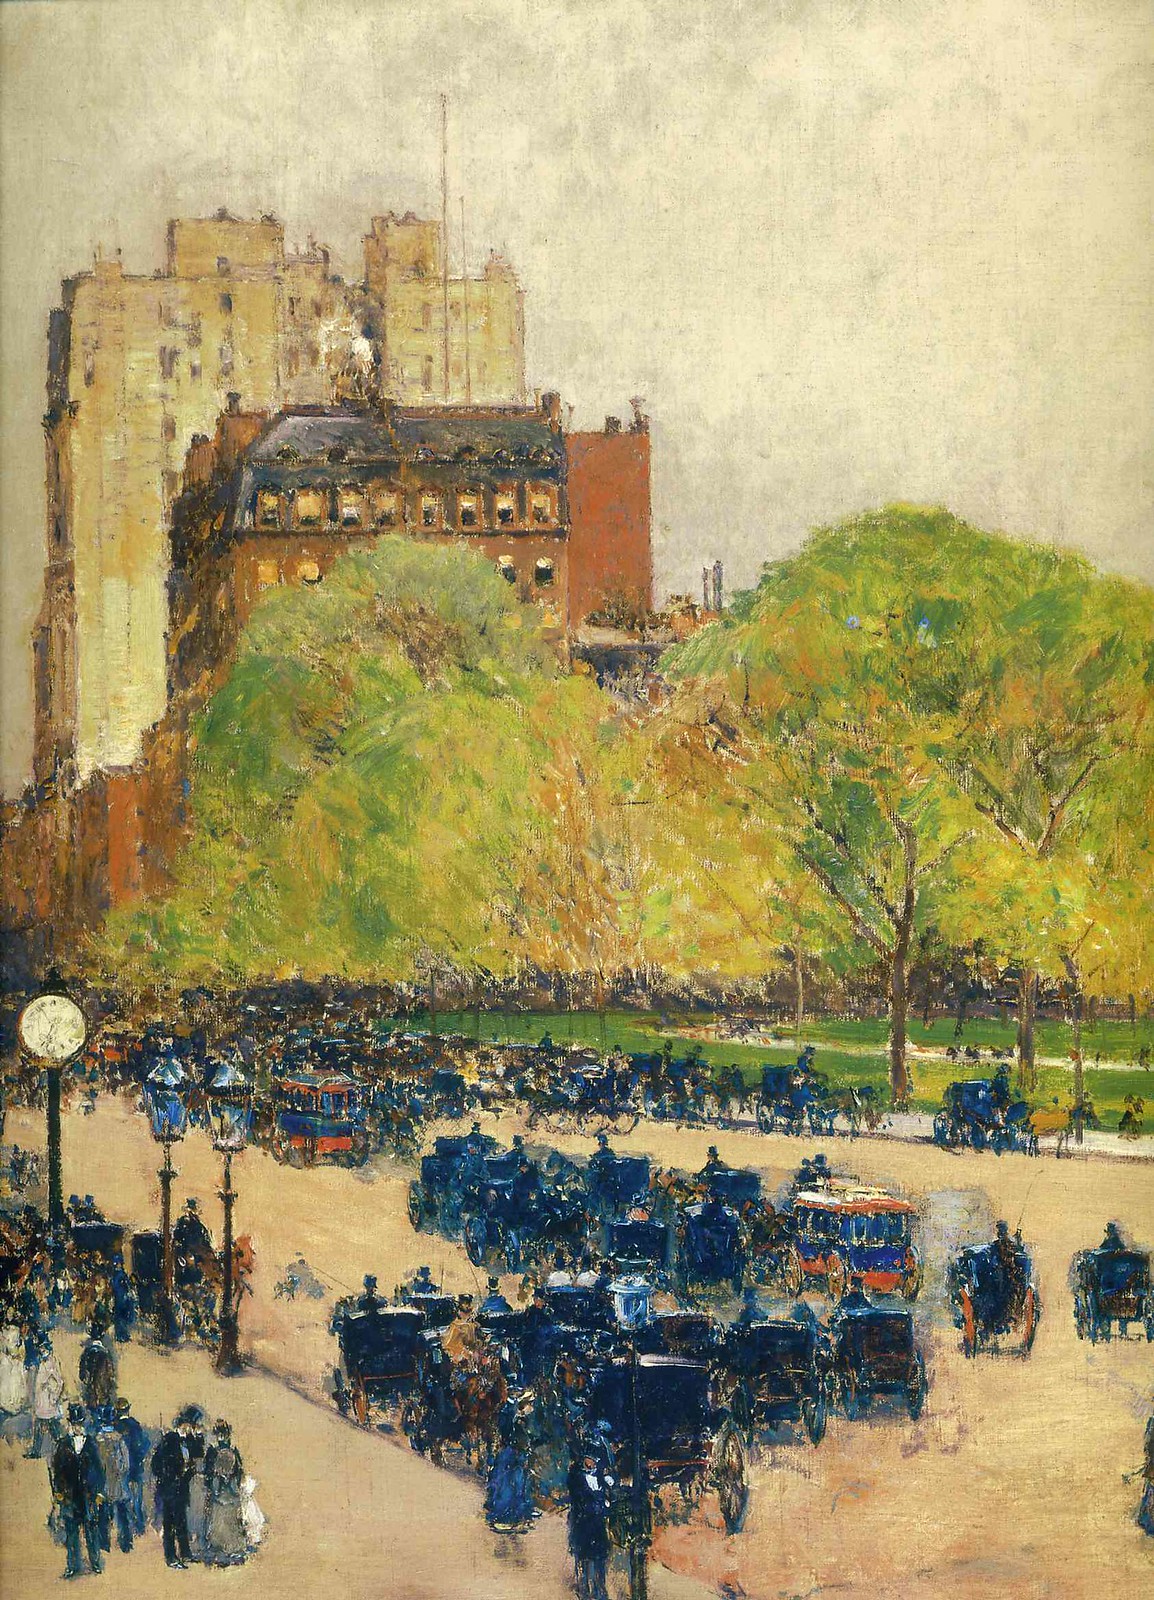 Spring Morning In The Heart Of The City by Childe Hassam, 1890